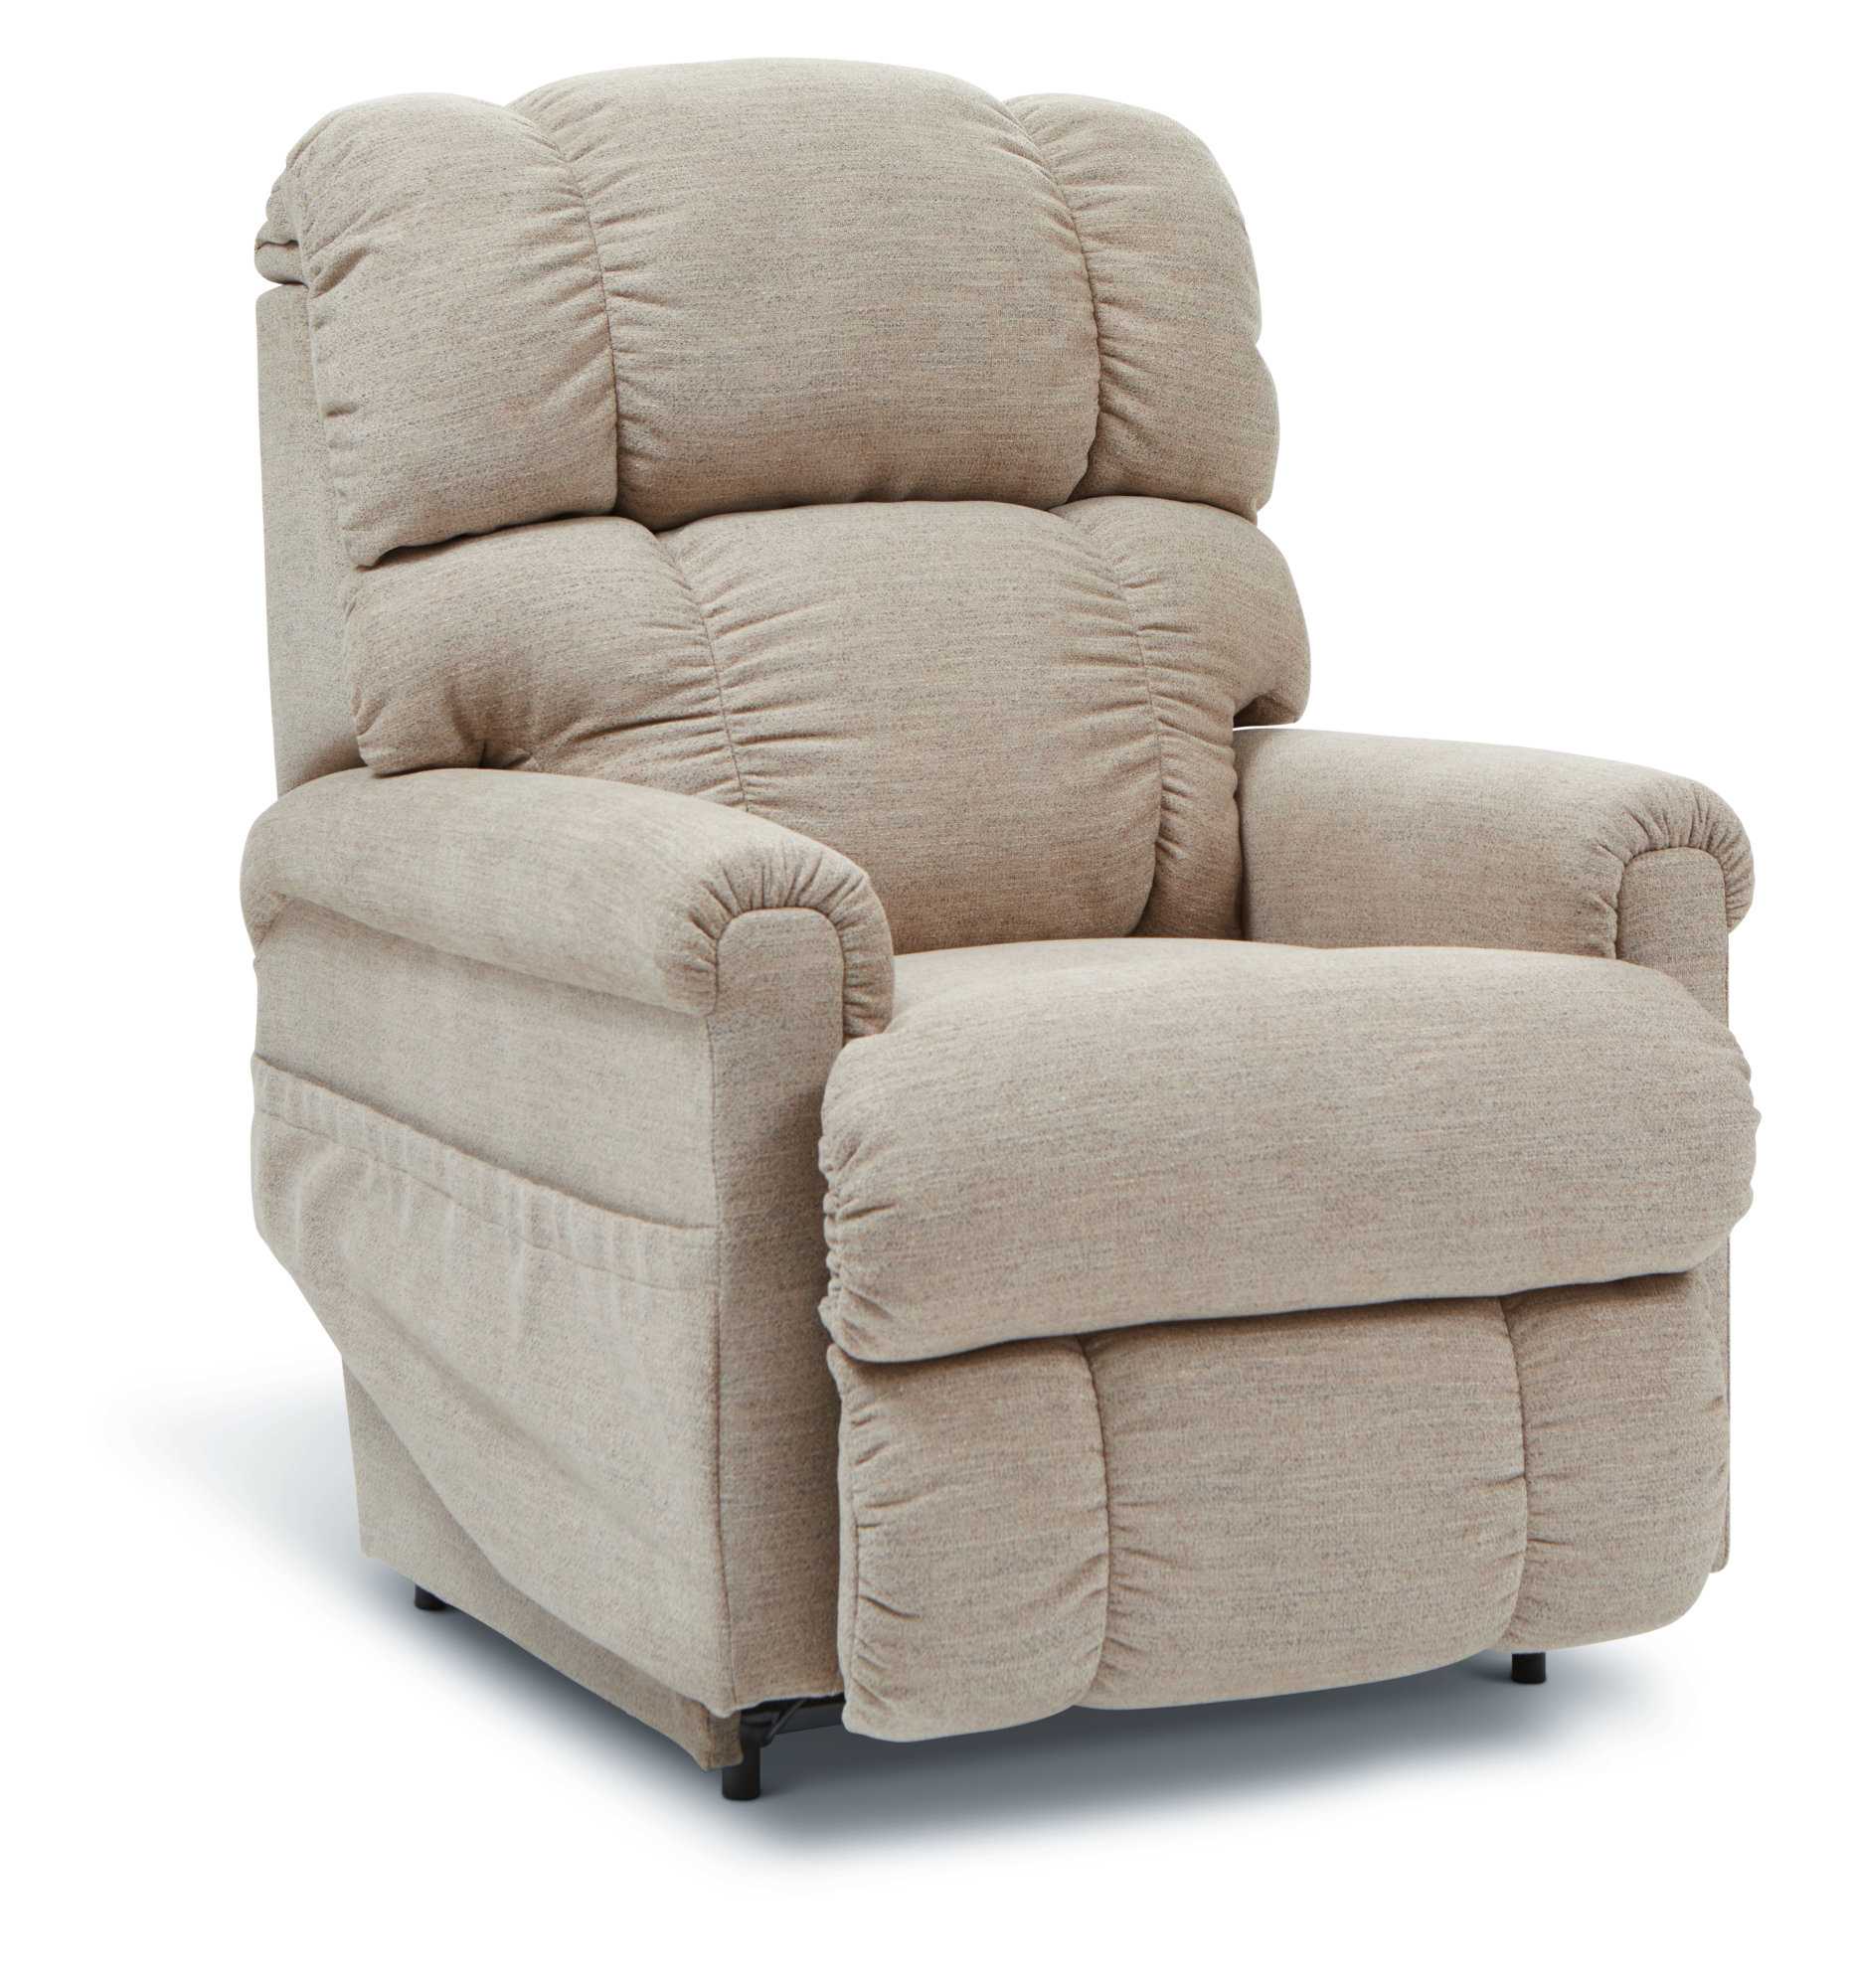 Pinnacle Power Lift Recliner with iClean Fabric and Power Headrest and Lumbar